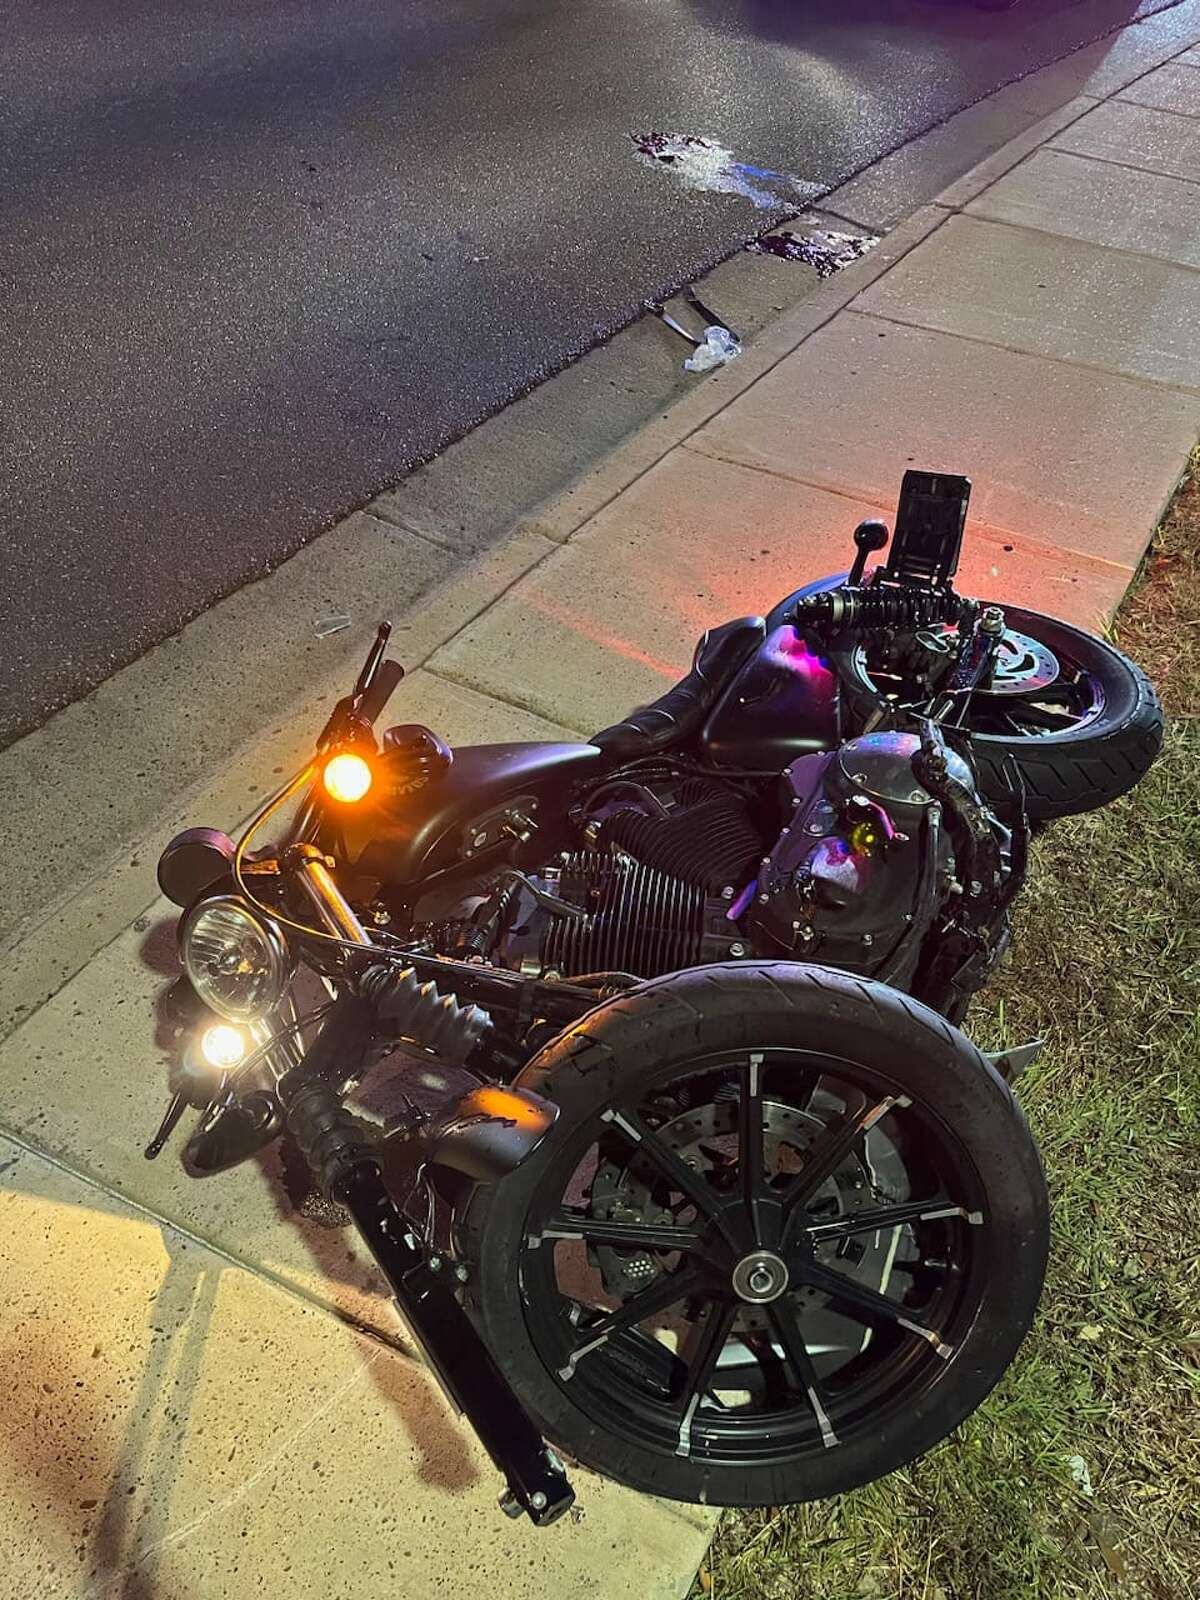 Man seriously injured in Laredo after motorcycle collides with vehicle